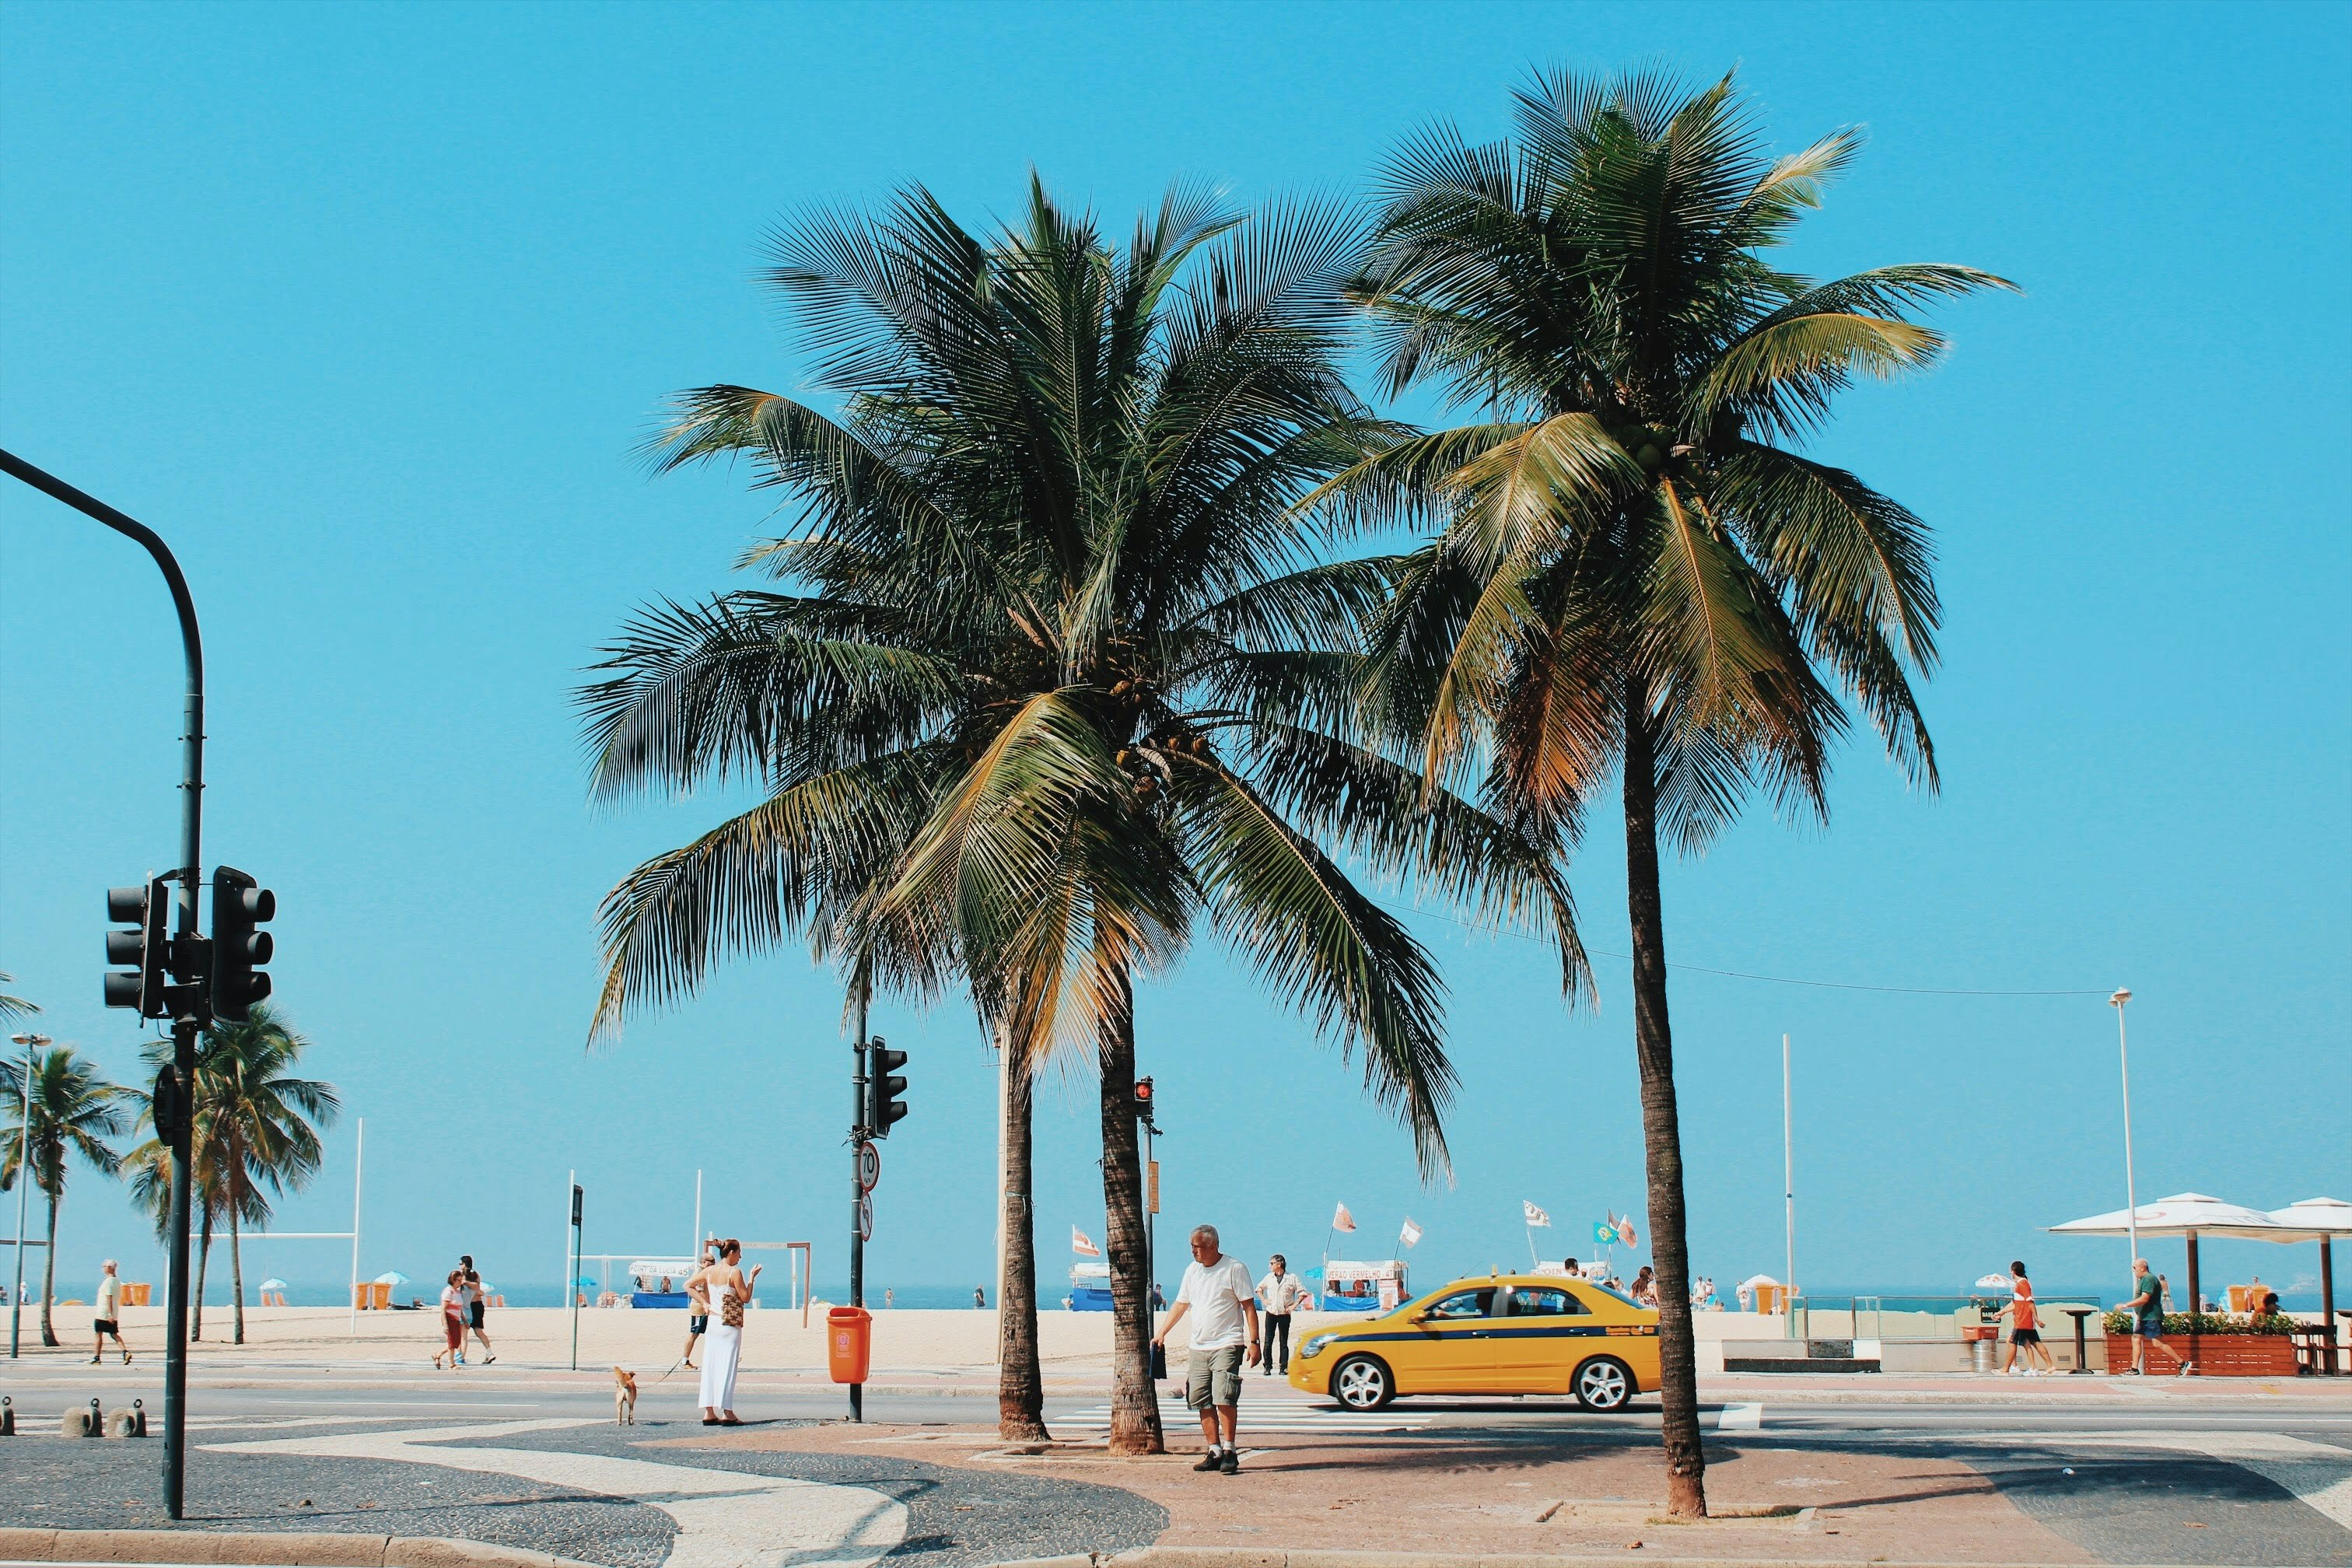 people walking near coconut trees and yellow car during daytime